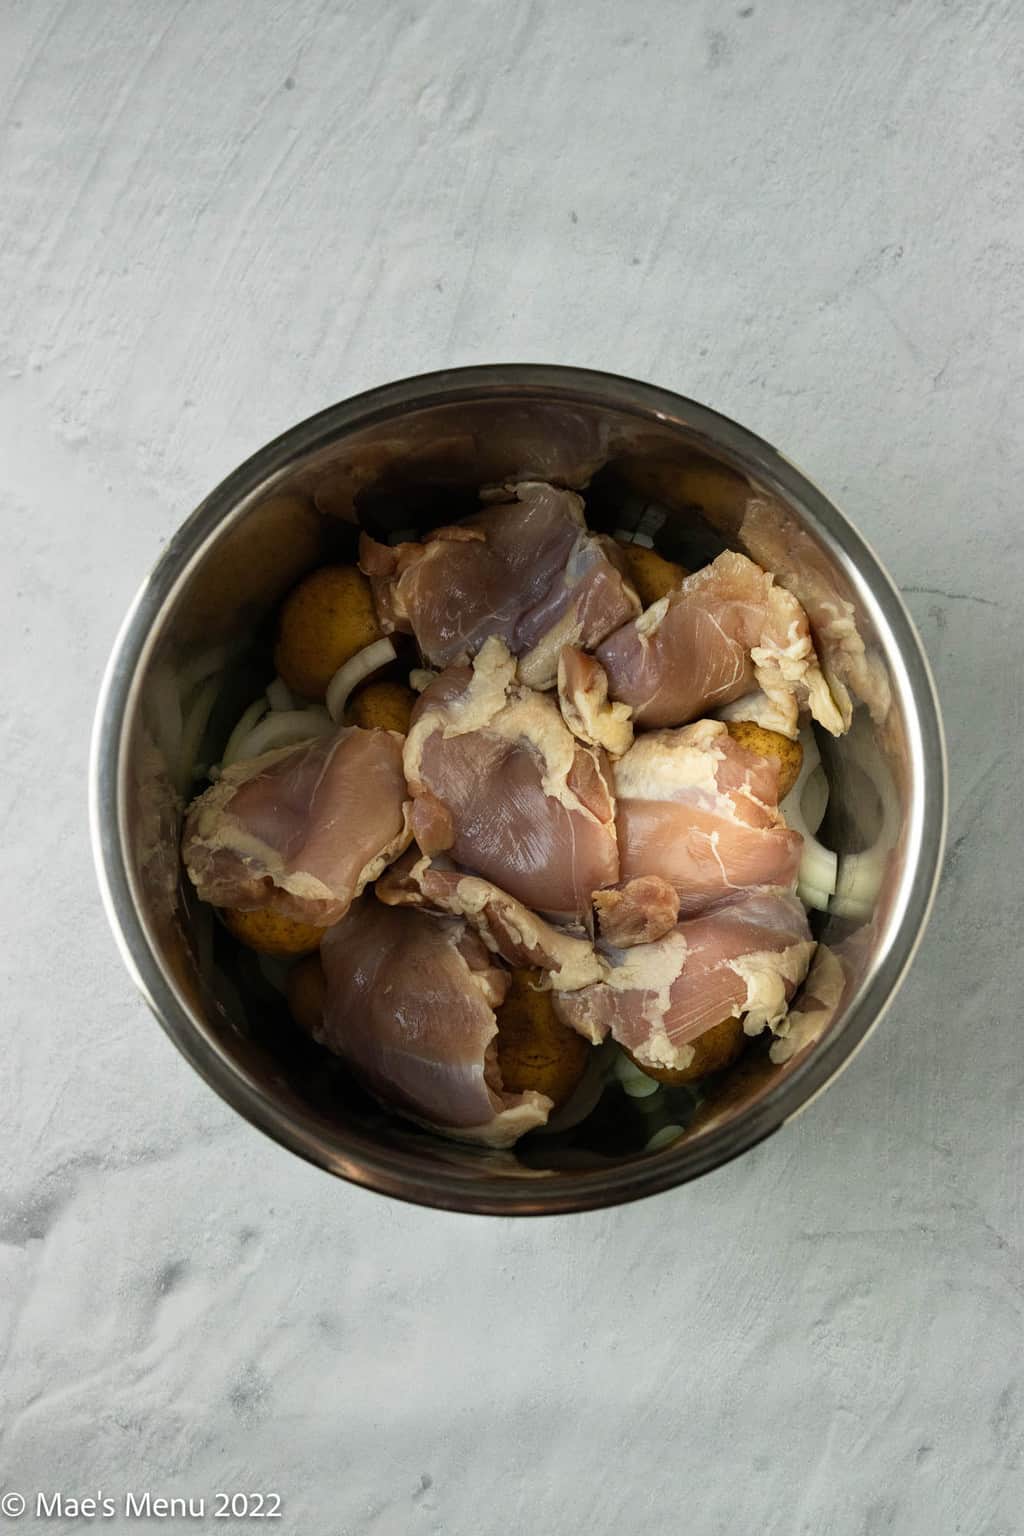 Chicken in the bowl of an Instant Pot.